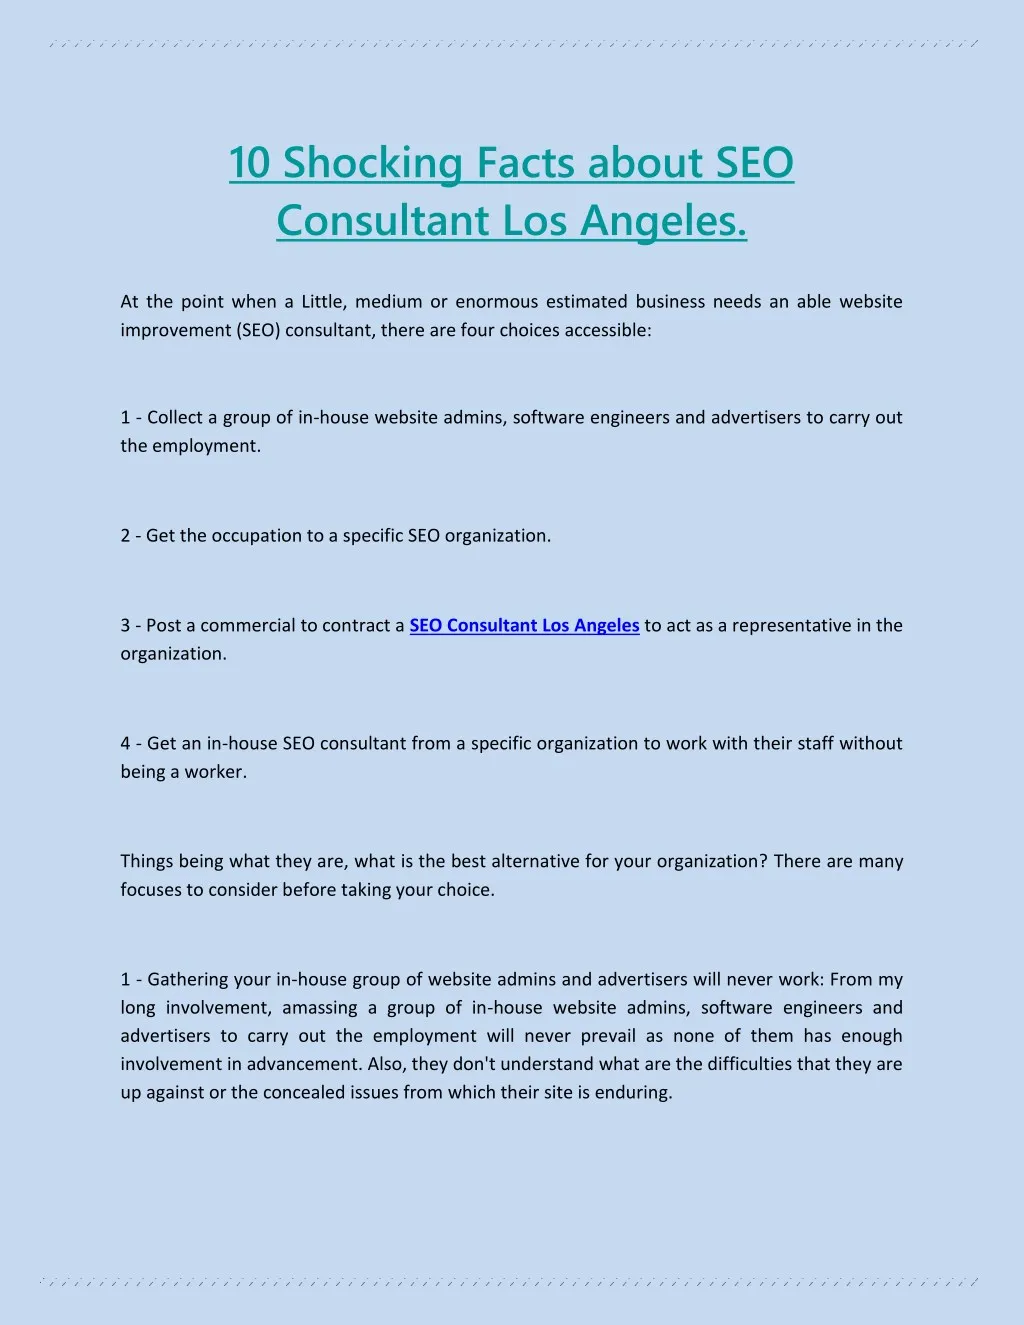 10 shocking facts about seo consultant los angeles